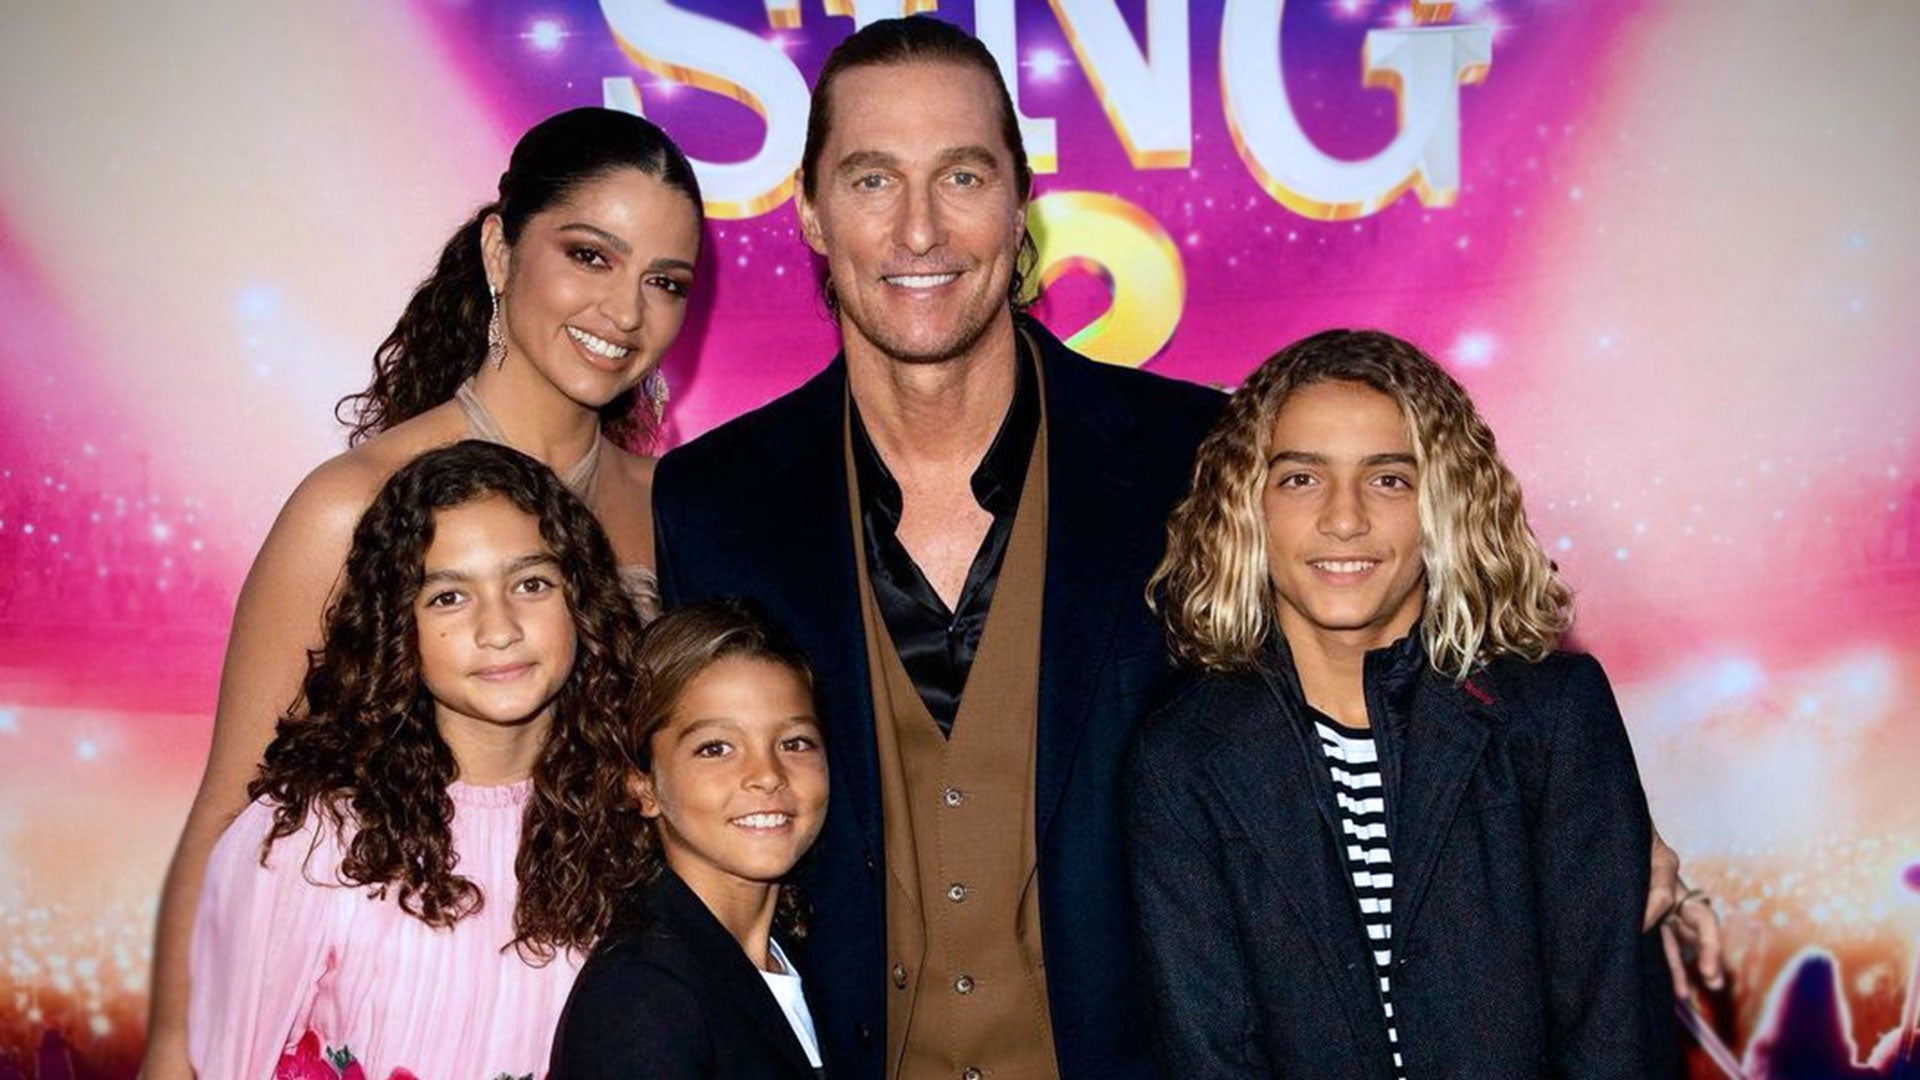 Matthew McConaughey and Camila Alves' Children Are So Grown Up in Rare Red  Carpet Pic | Entertainment Tonight